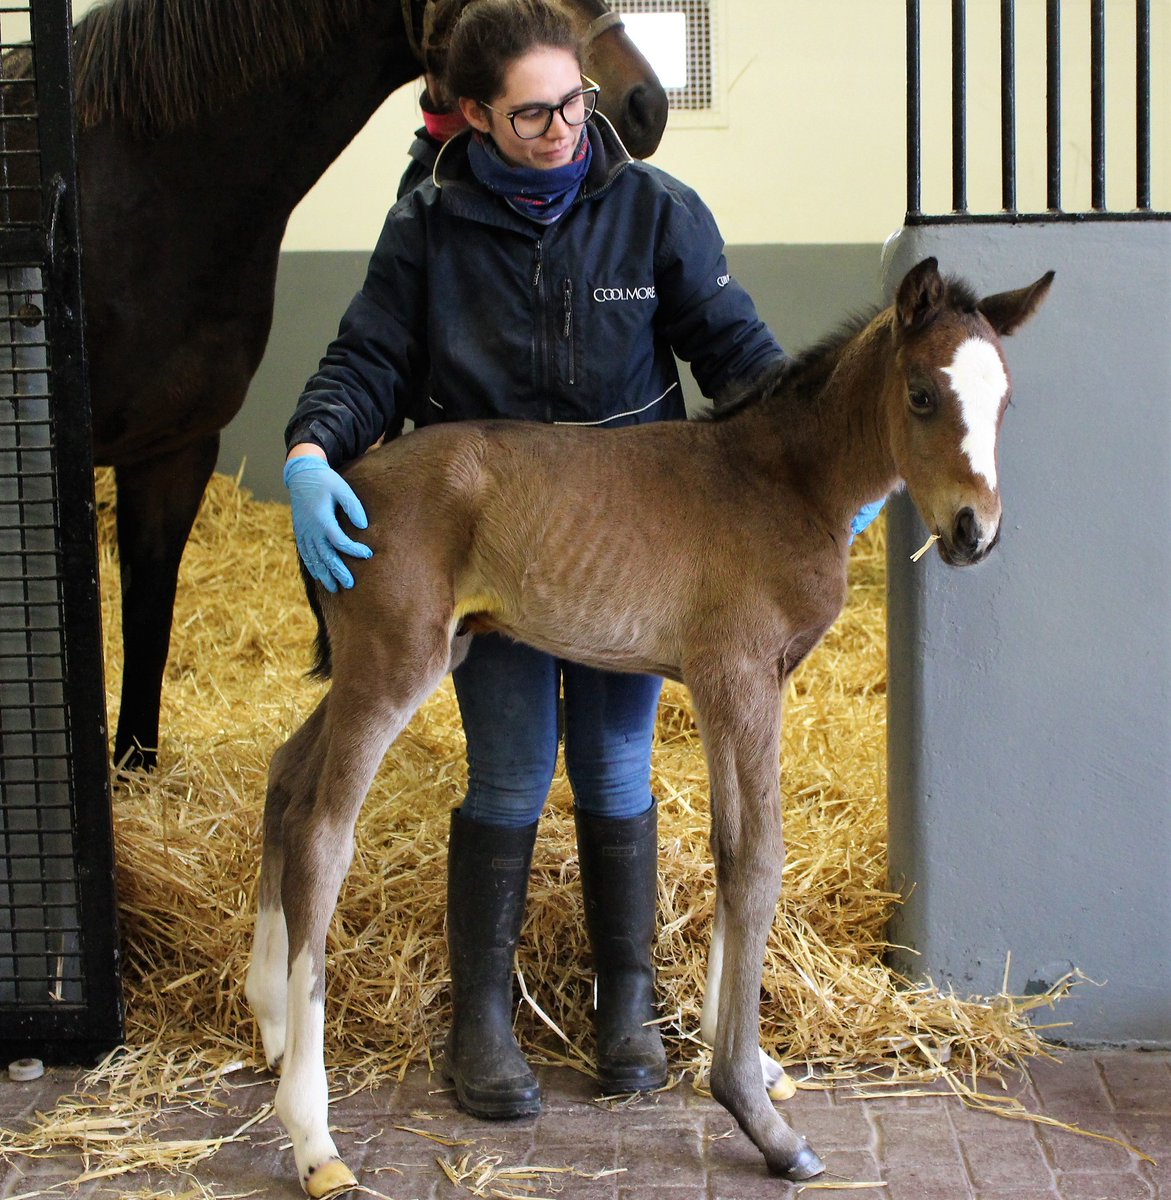 1️⃣st foal 🐎

💚 BLOWOUT, G1🇺🇸 winner by DANSILI from G1🇲🇫 winner BEAUTY PARLOUR, has had a filly by @JuddmonteFarms FRANKEL on February 26 at @coolmorestud.

Wildenstein 🐎
💙 BLOWOUT bought by  @WhiteBirchFarm_ at Wildenstein Stables Dispersal @Goffs1866

📷 WhiteBirch Farm